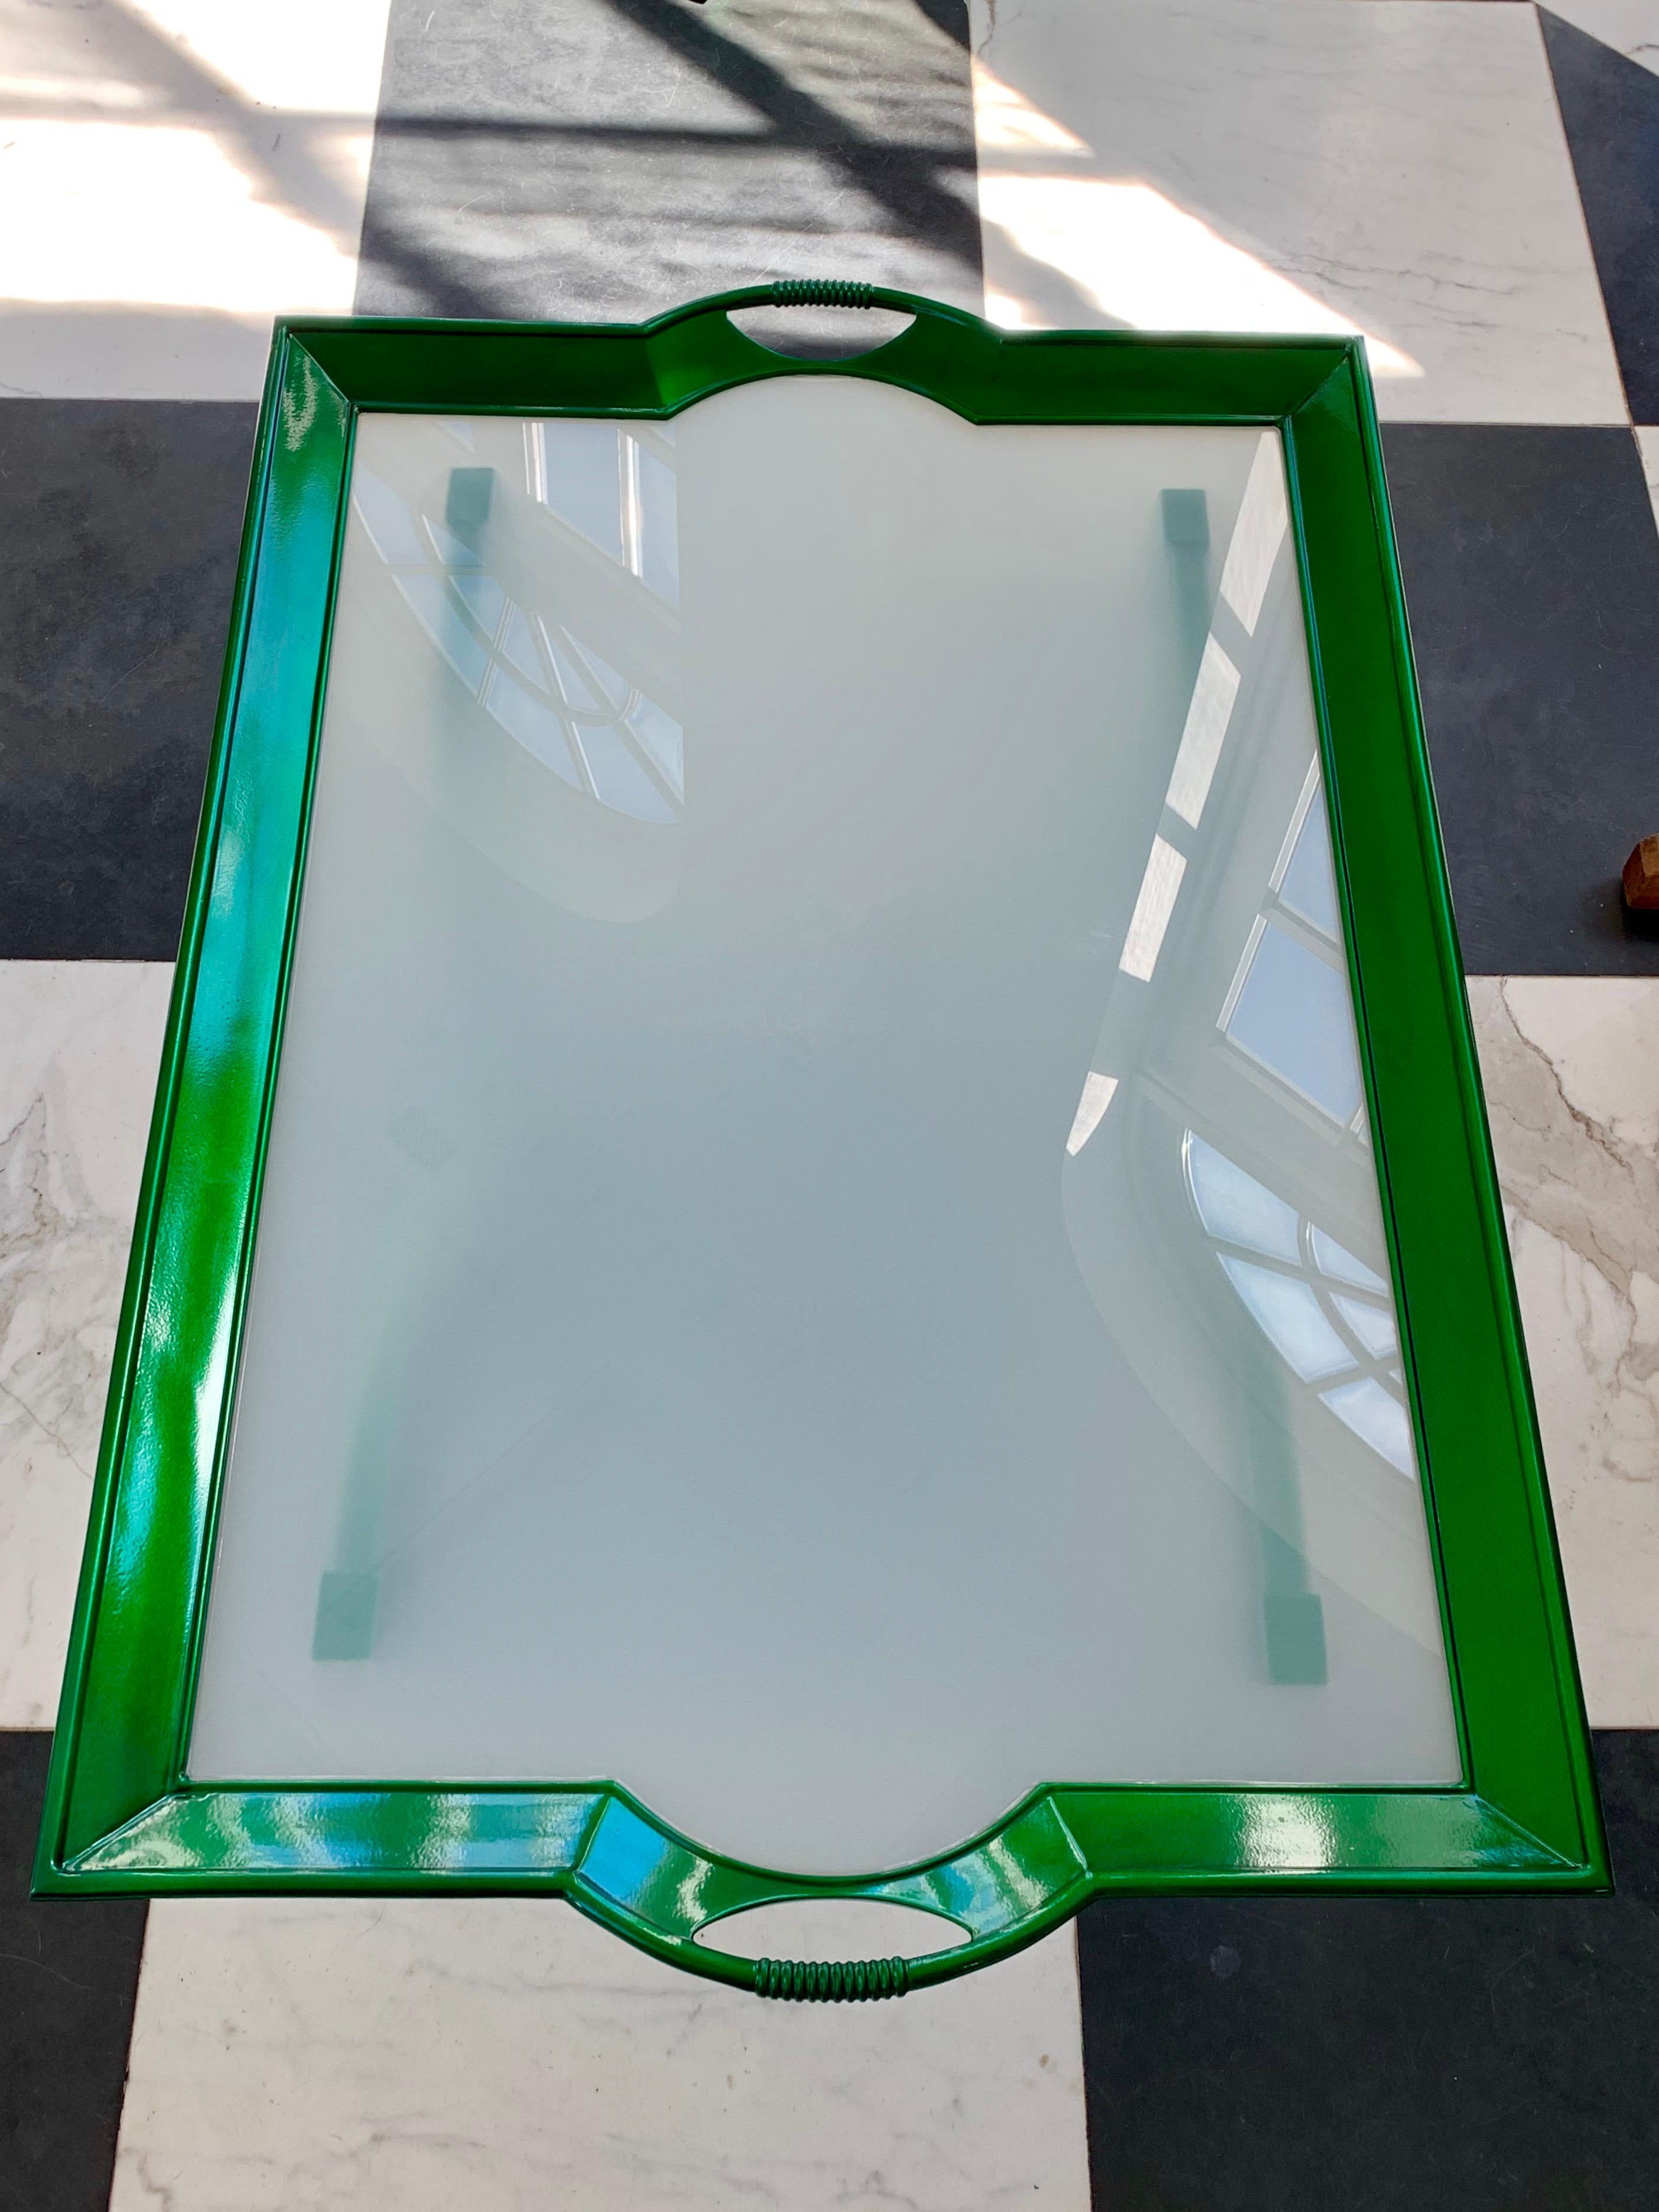 This is a La Barge glass “Tray” coffee table we had it powder coated in an emerald green color.
The powder coating process allows it to be used inside or outdoors. It won’t rust.
There are no scratches to the glass as we had it replaced as well the